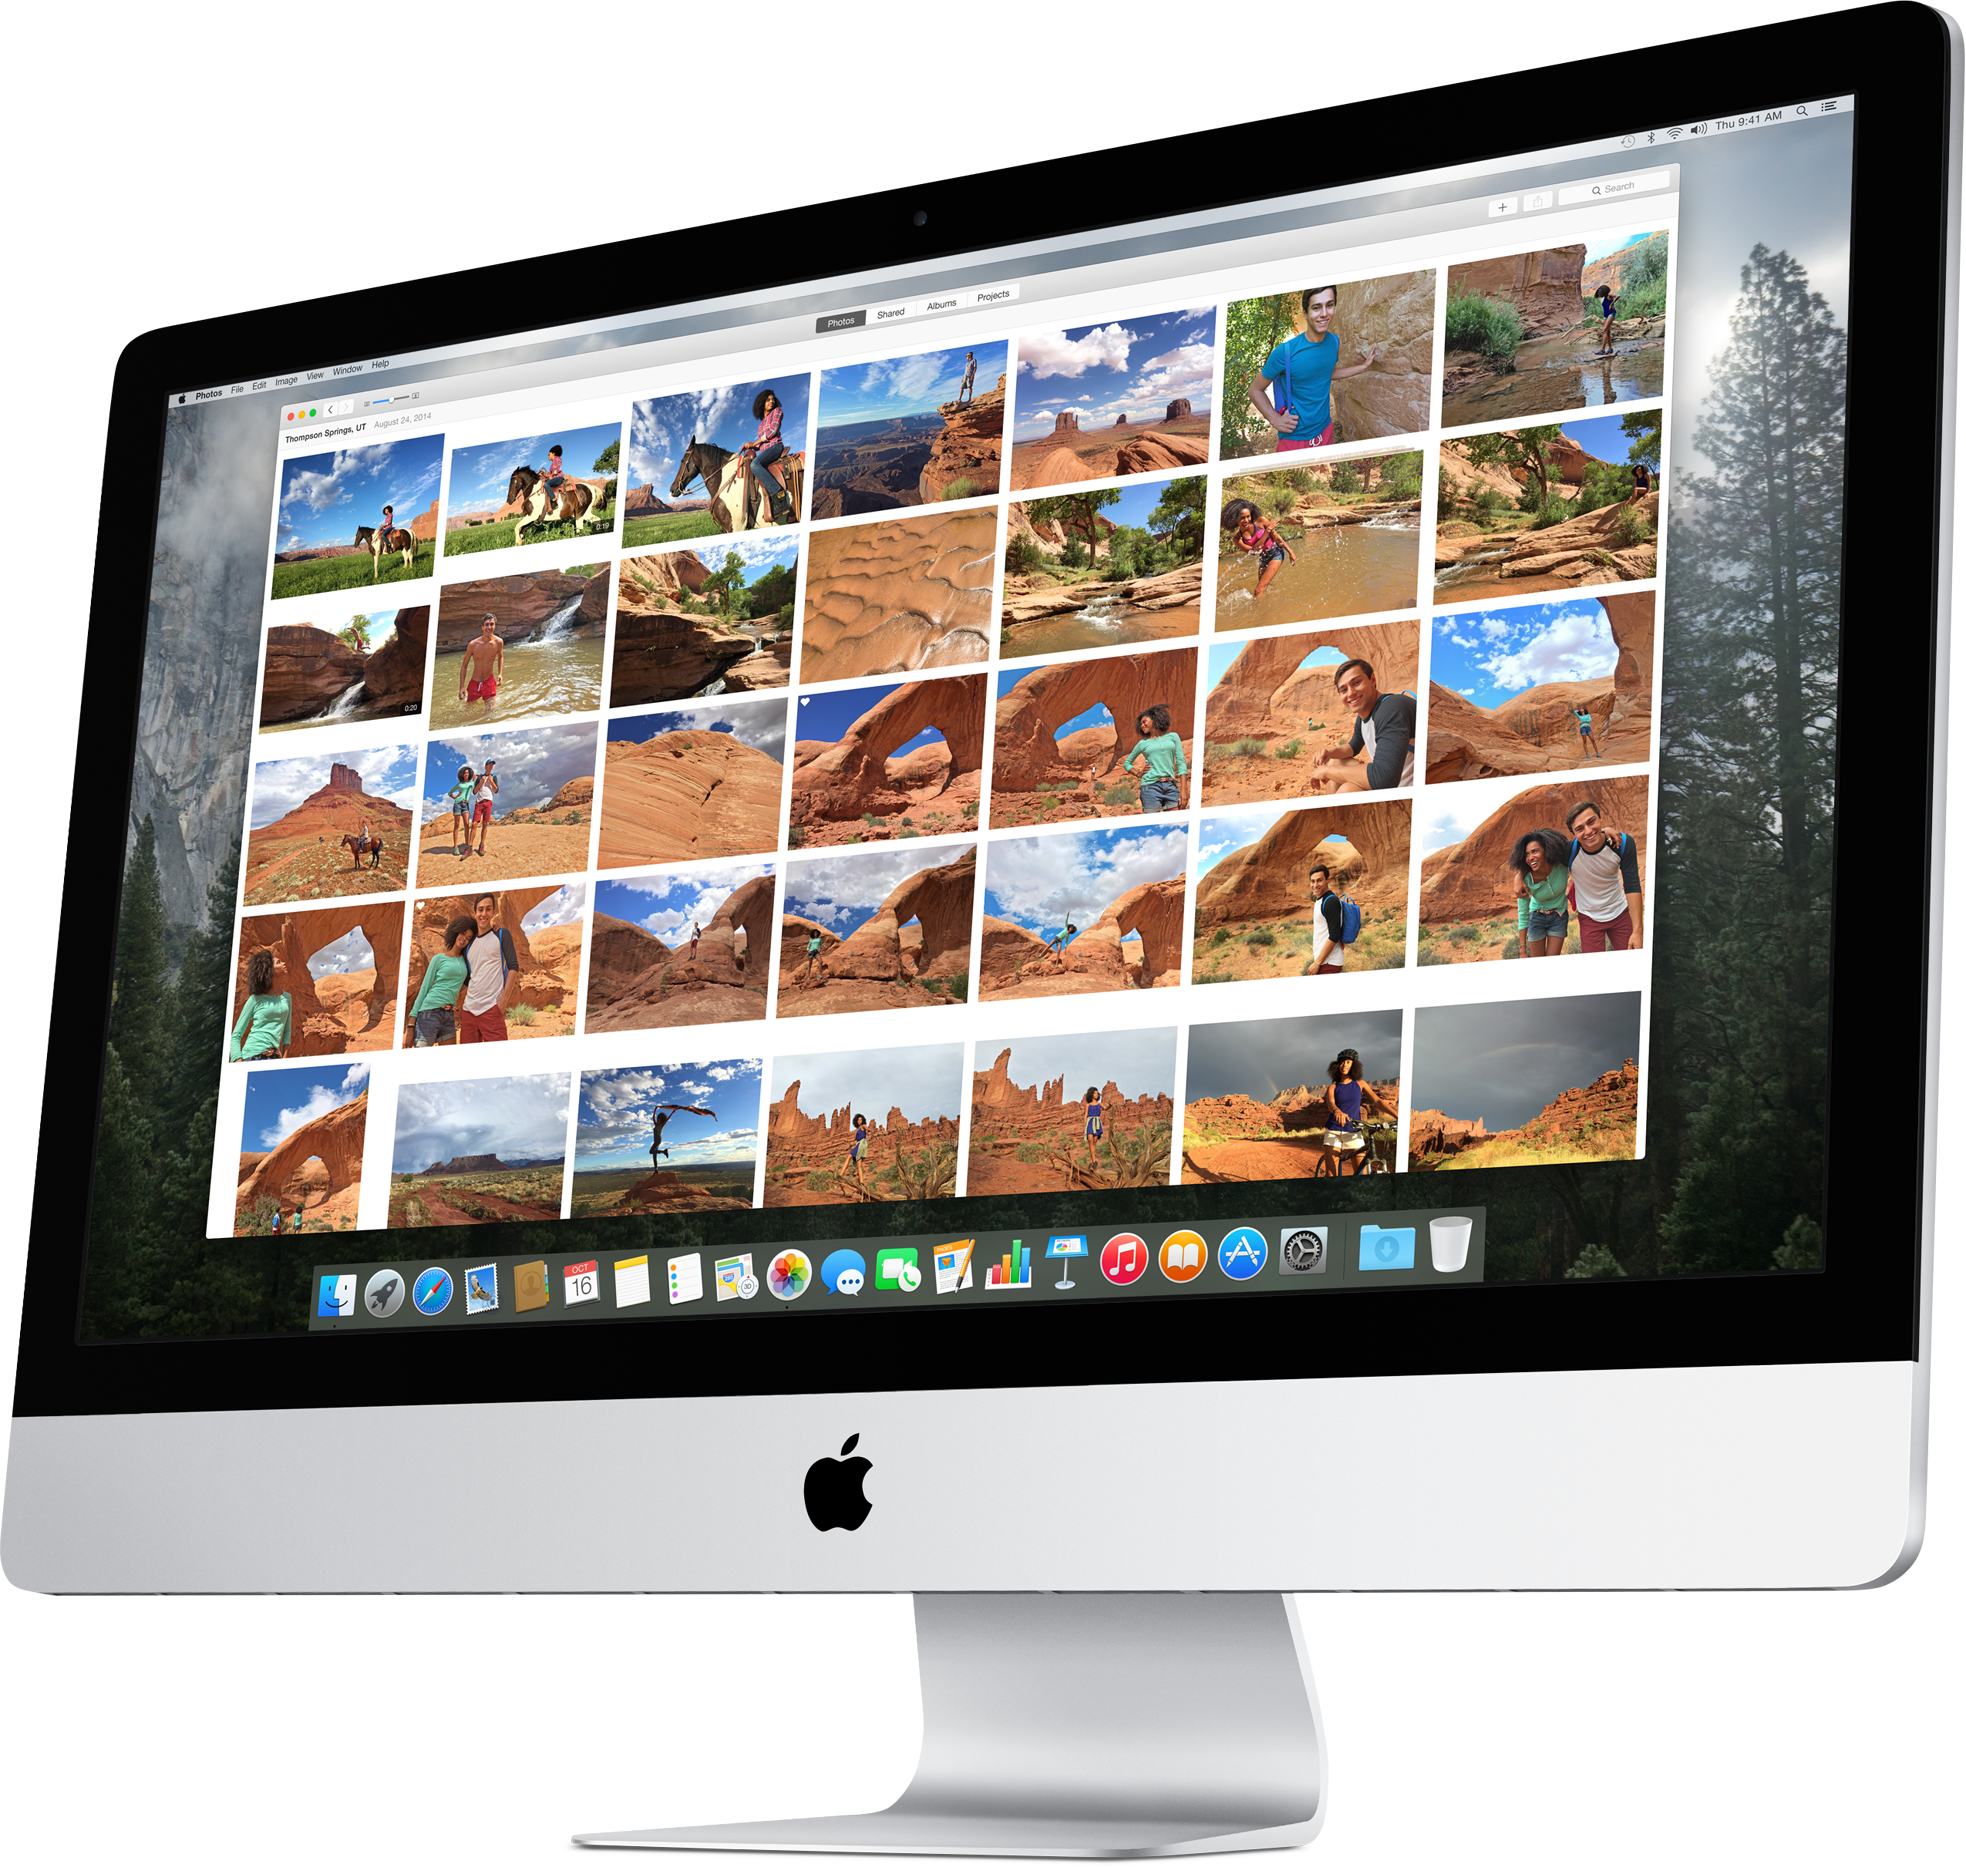 Determining what is in your iphotos app on mac computer